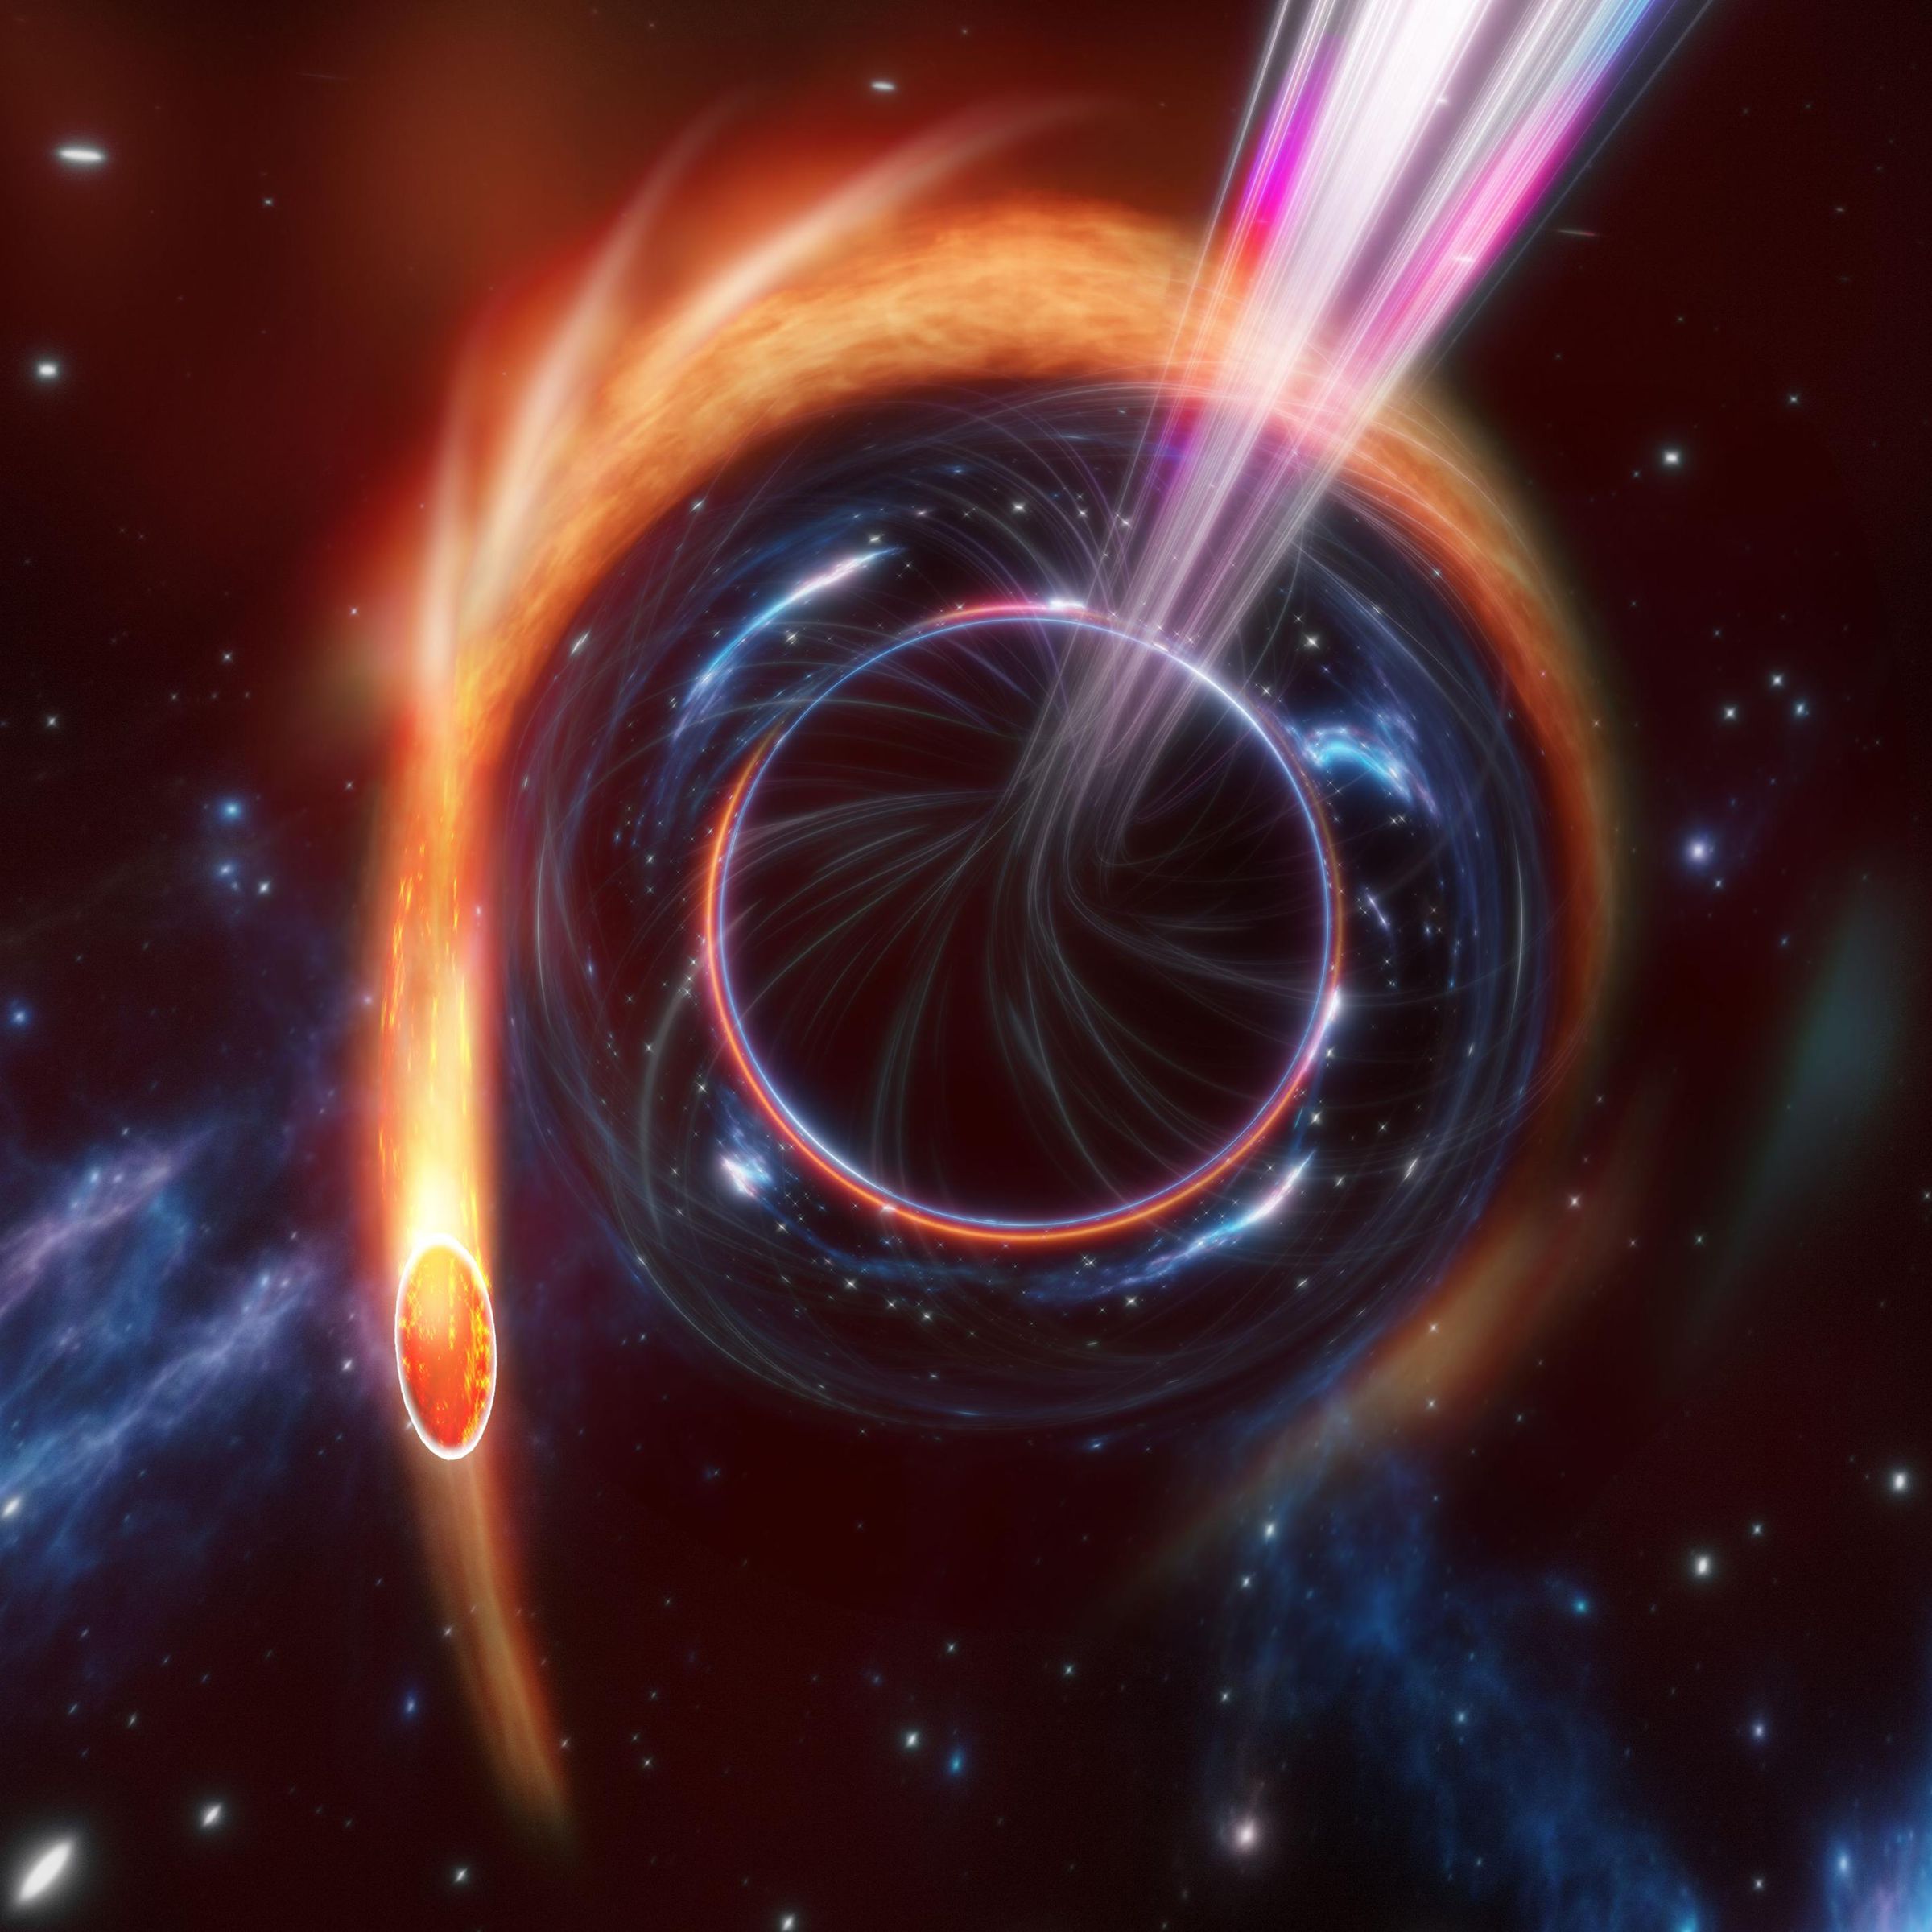 An illustration of an orange star being swirled apart against a stretched-out starscape. At the center of the image is a jet of pink light emanating from a dark area, a black hole.